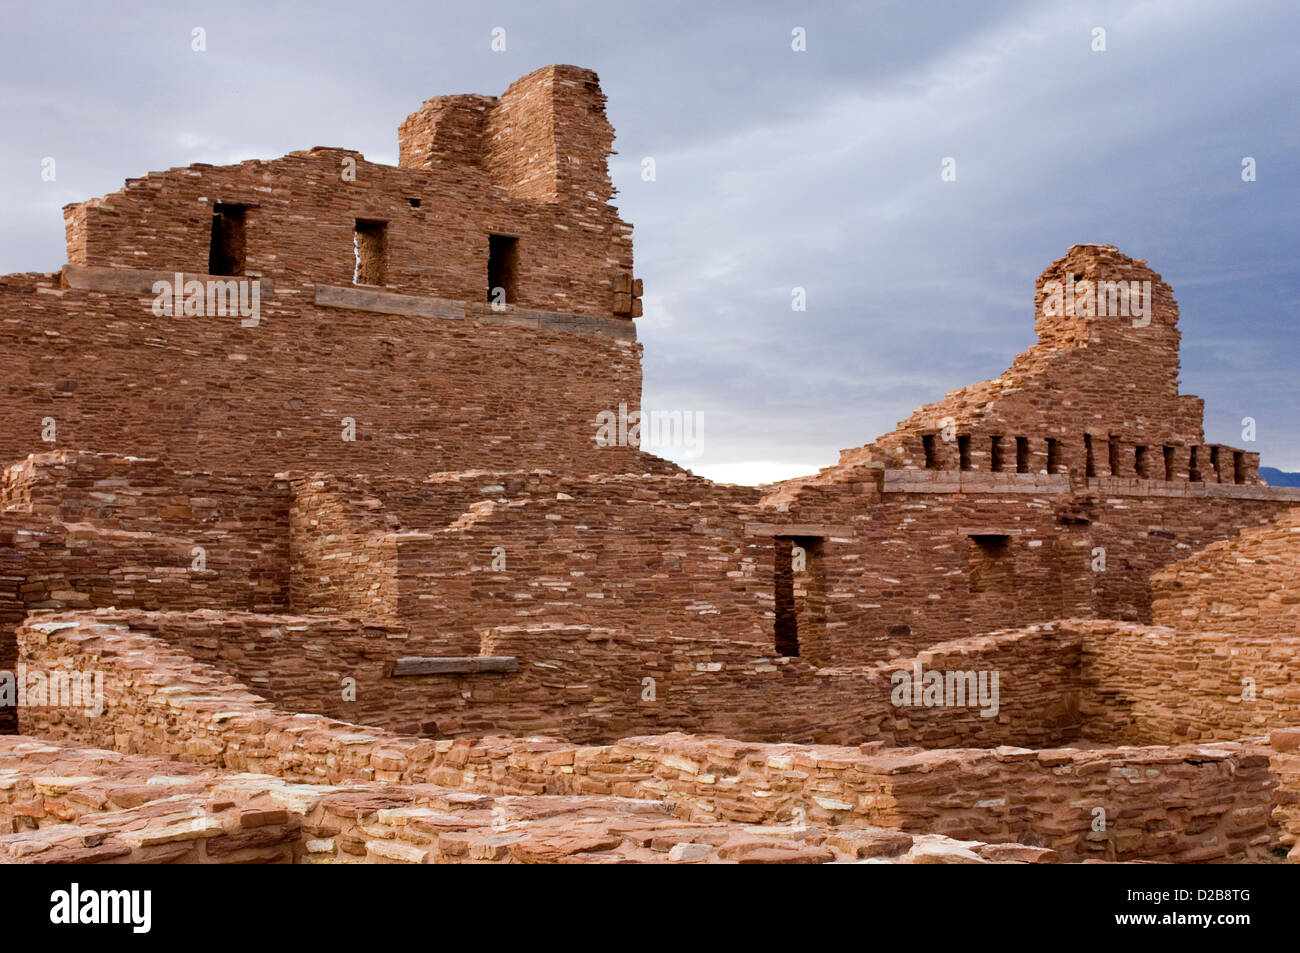 New Mexico, Salinas Pueblo Missions National Monument. Abo Ruins. Ruins Of The San Gregorio De Abo Spanish Mission Church. Stock Photo